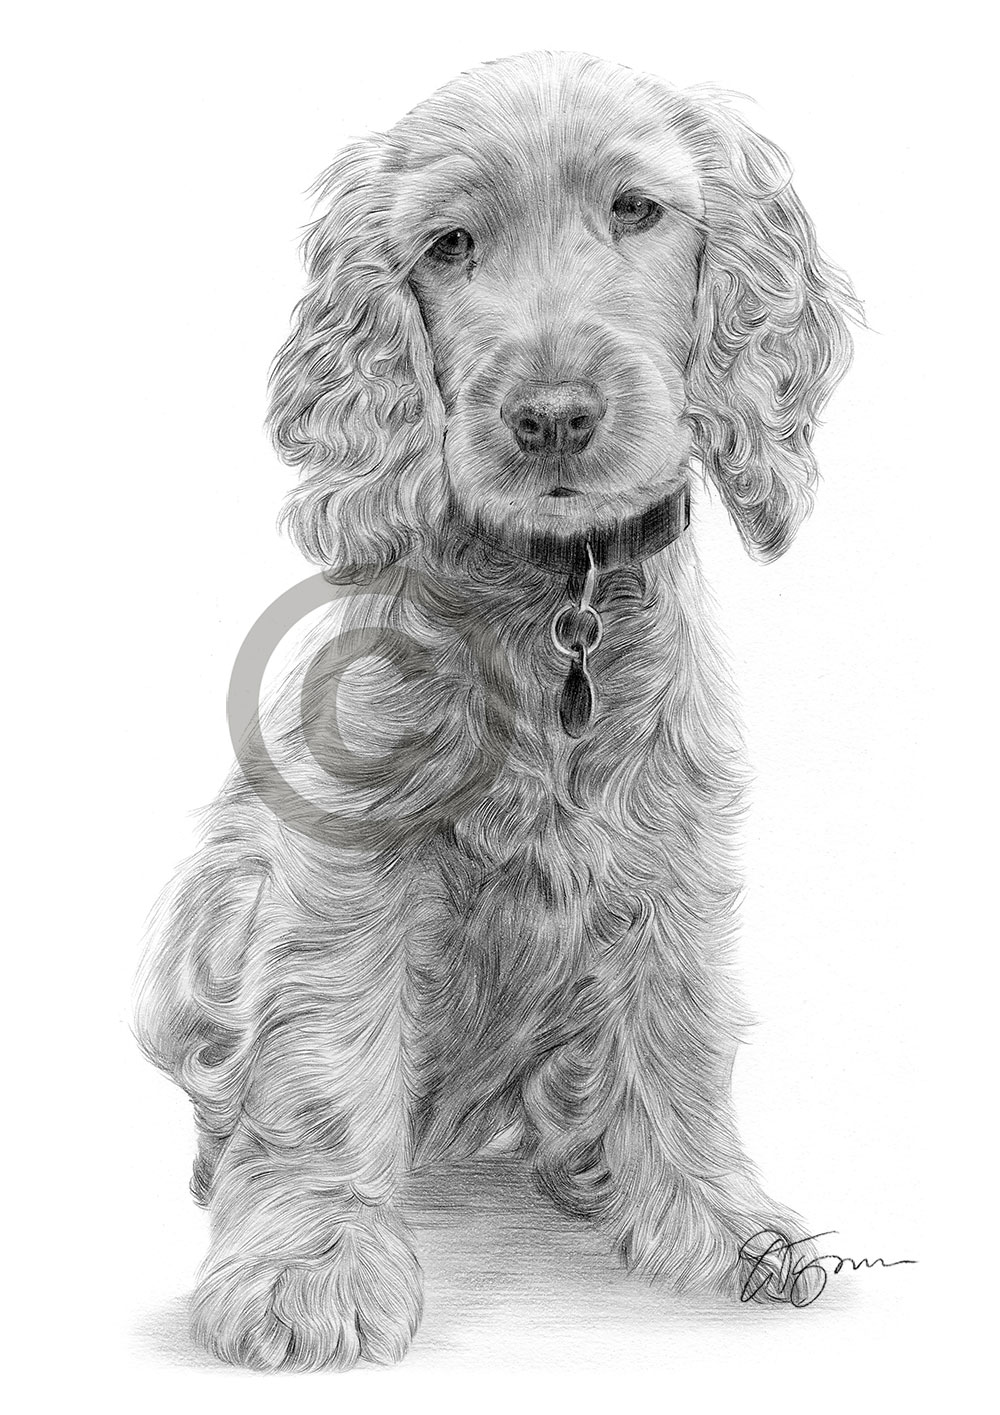 Pencil drawing of a young Cocker Spaniel puppy by artist Gary Tymon